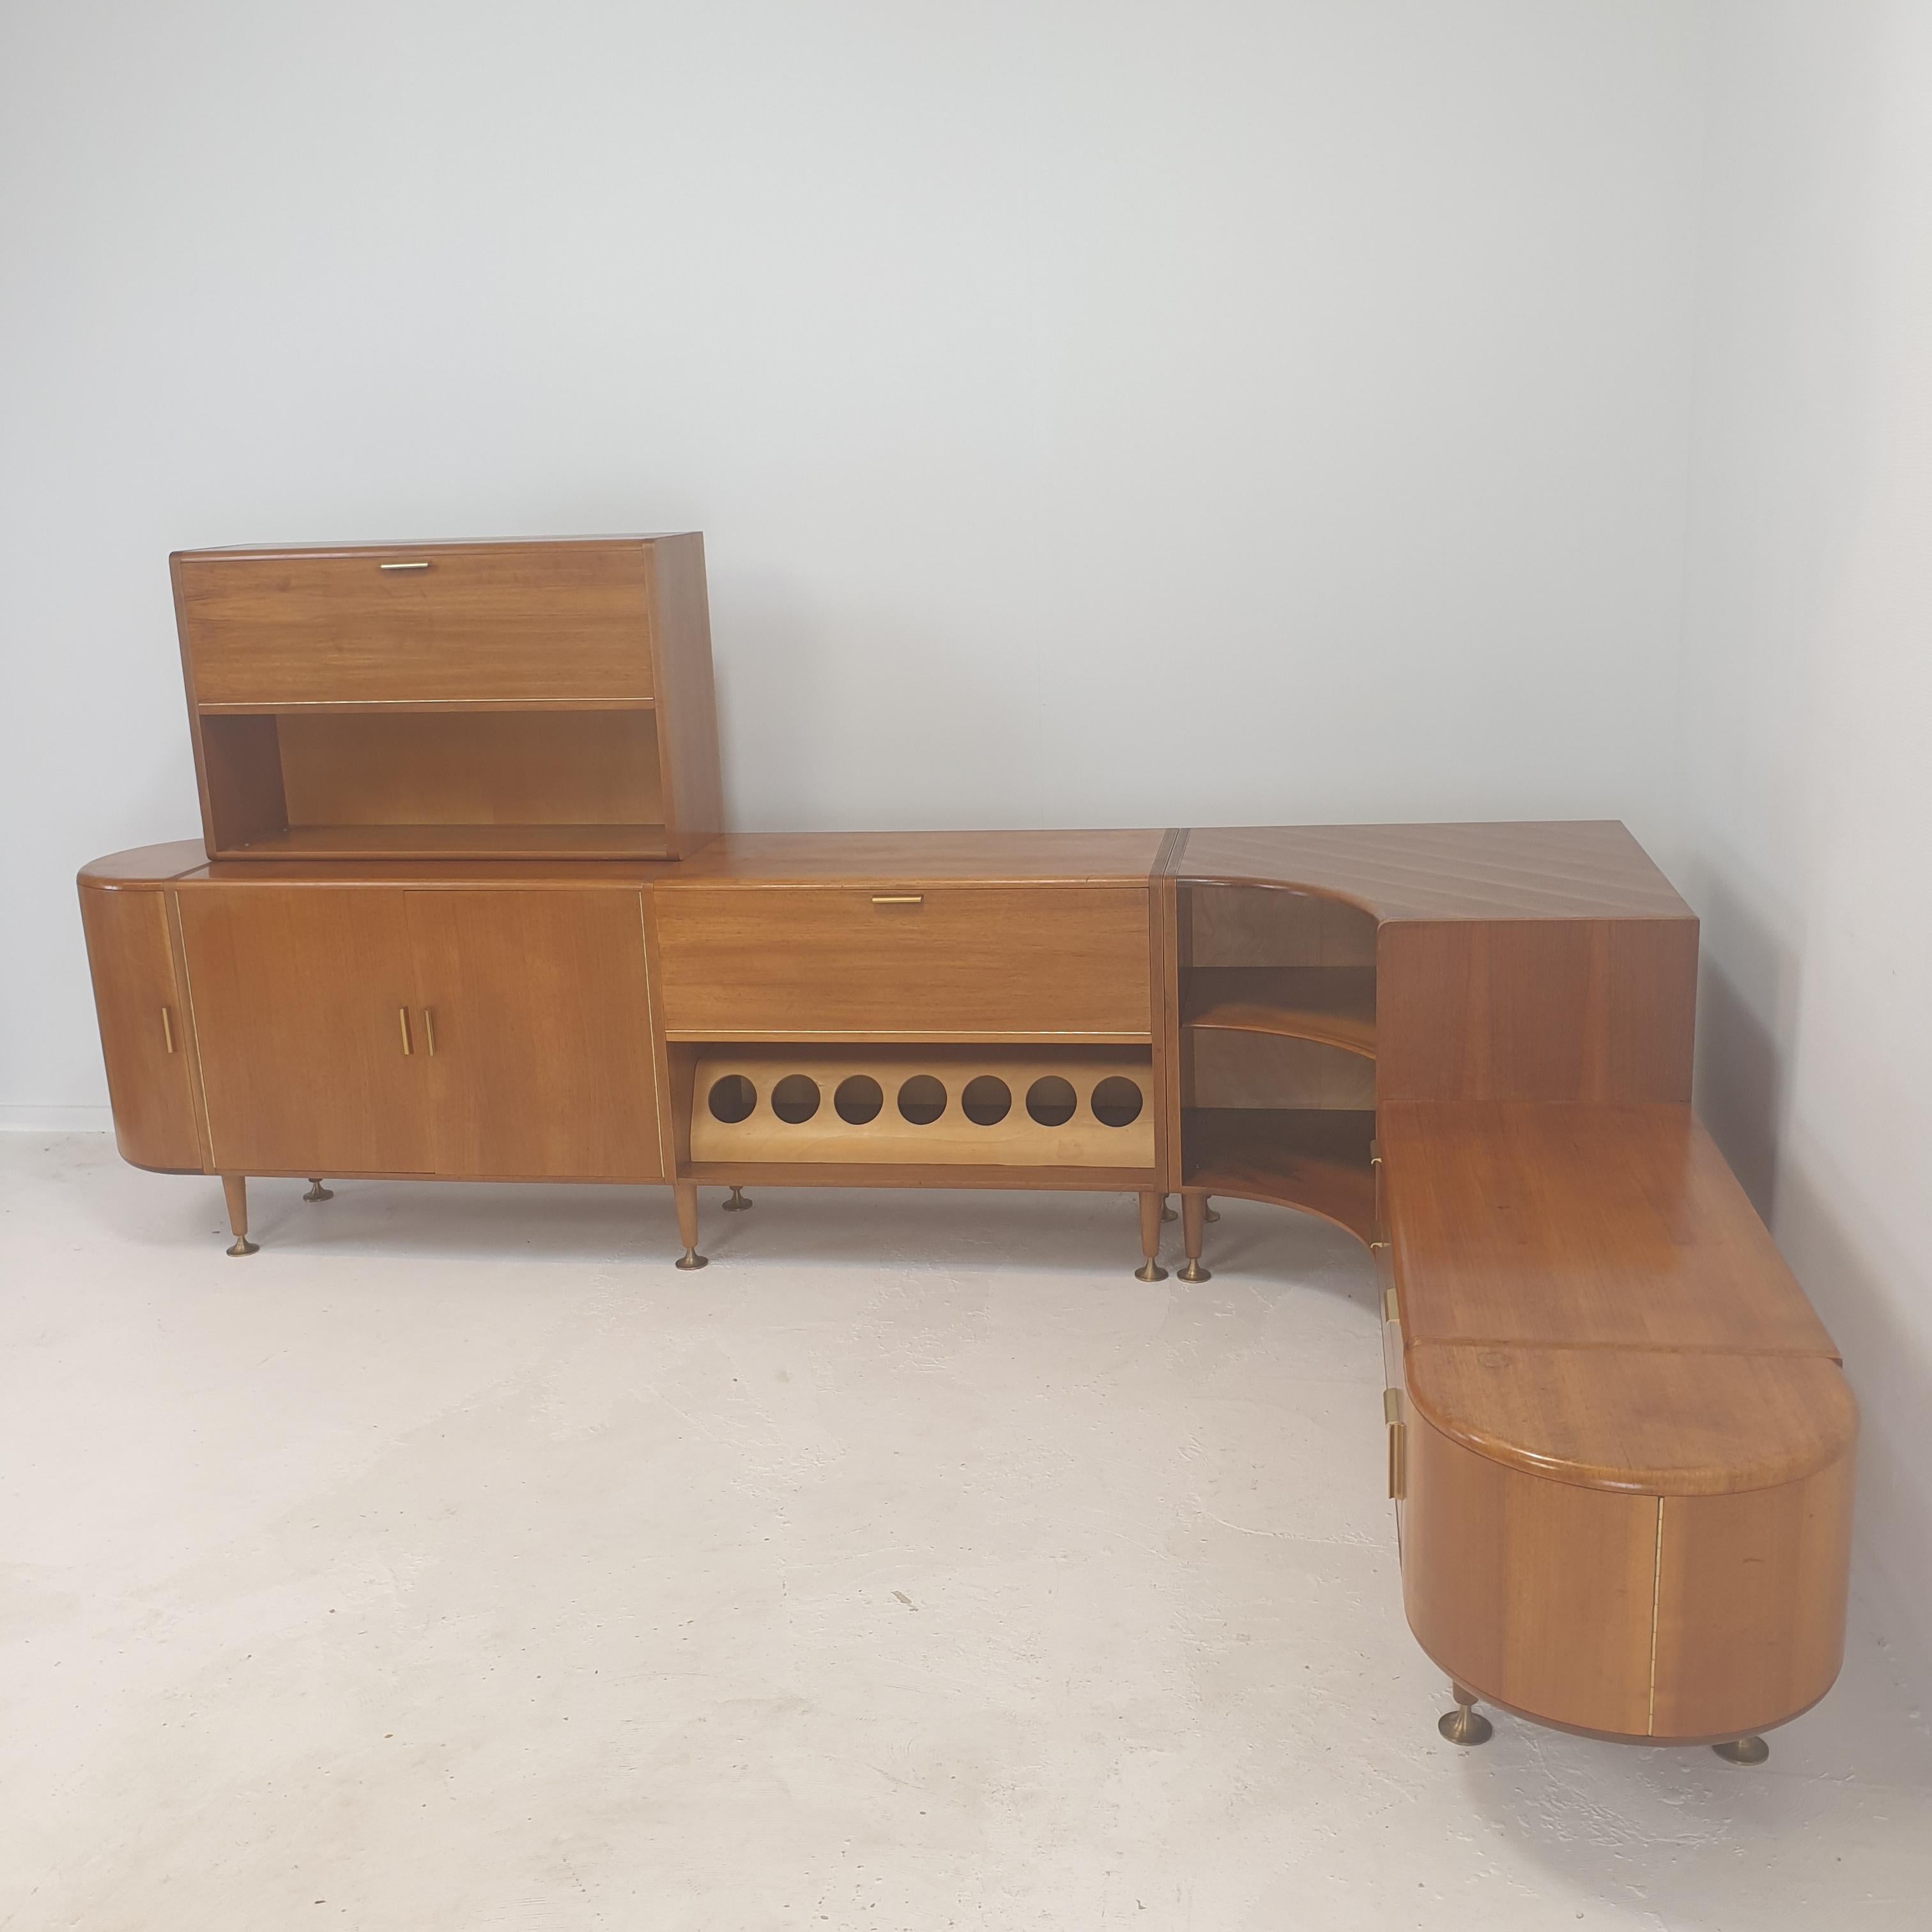 Mid-20th Century Mid-Century Walnut Cabinet and Sideboard by A.A. Patijn for Zijlstra, 1950's For Sale